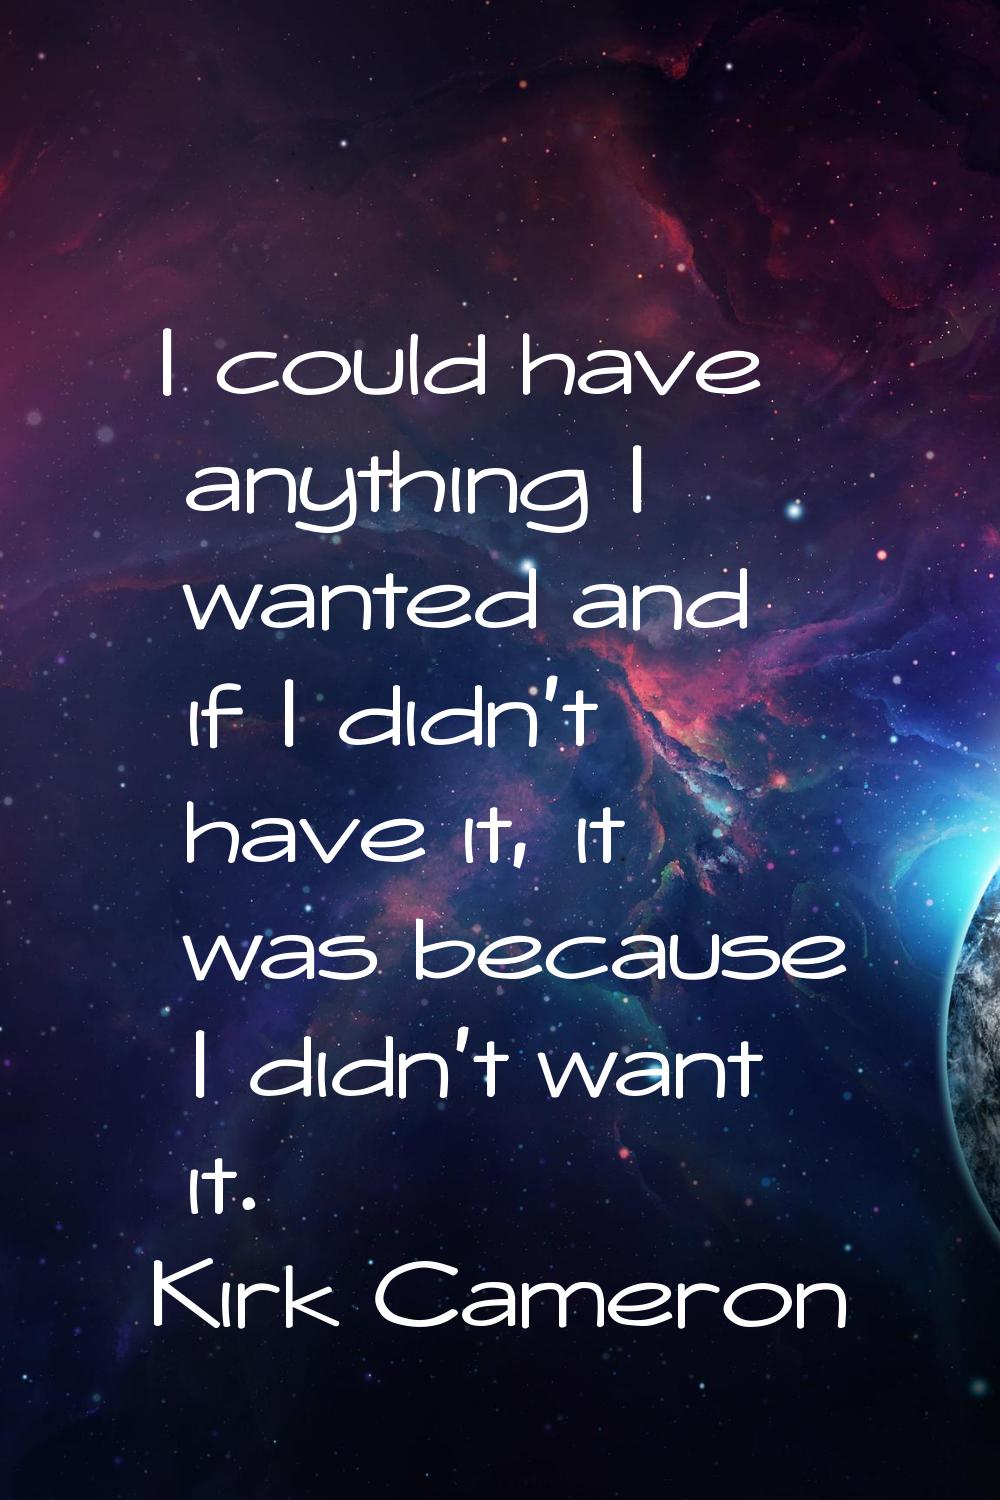 I could have anything I wanted and if I didn't have it, it was because I didn't want it.